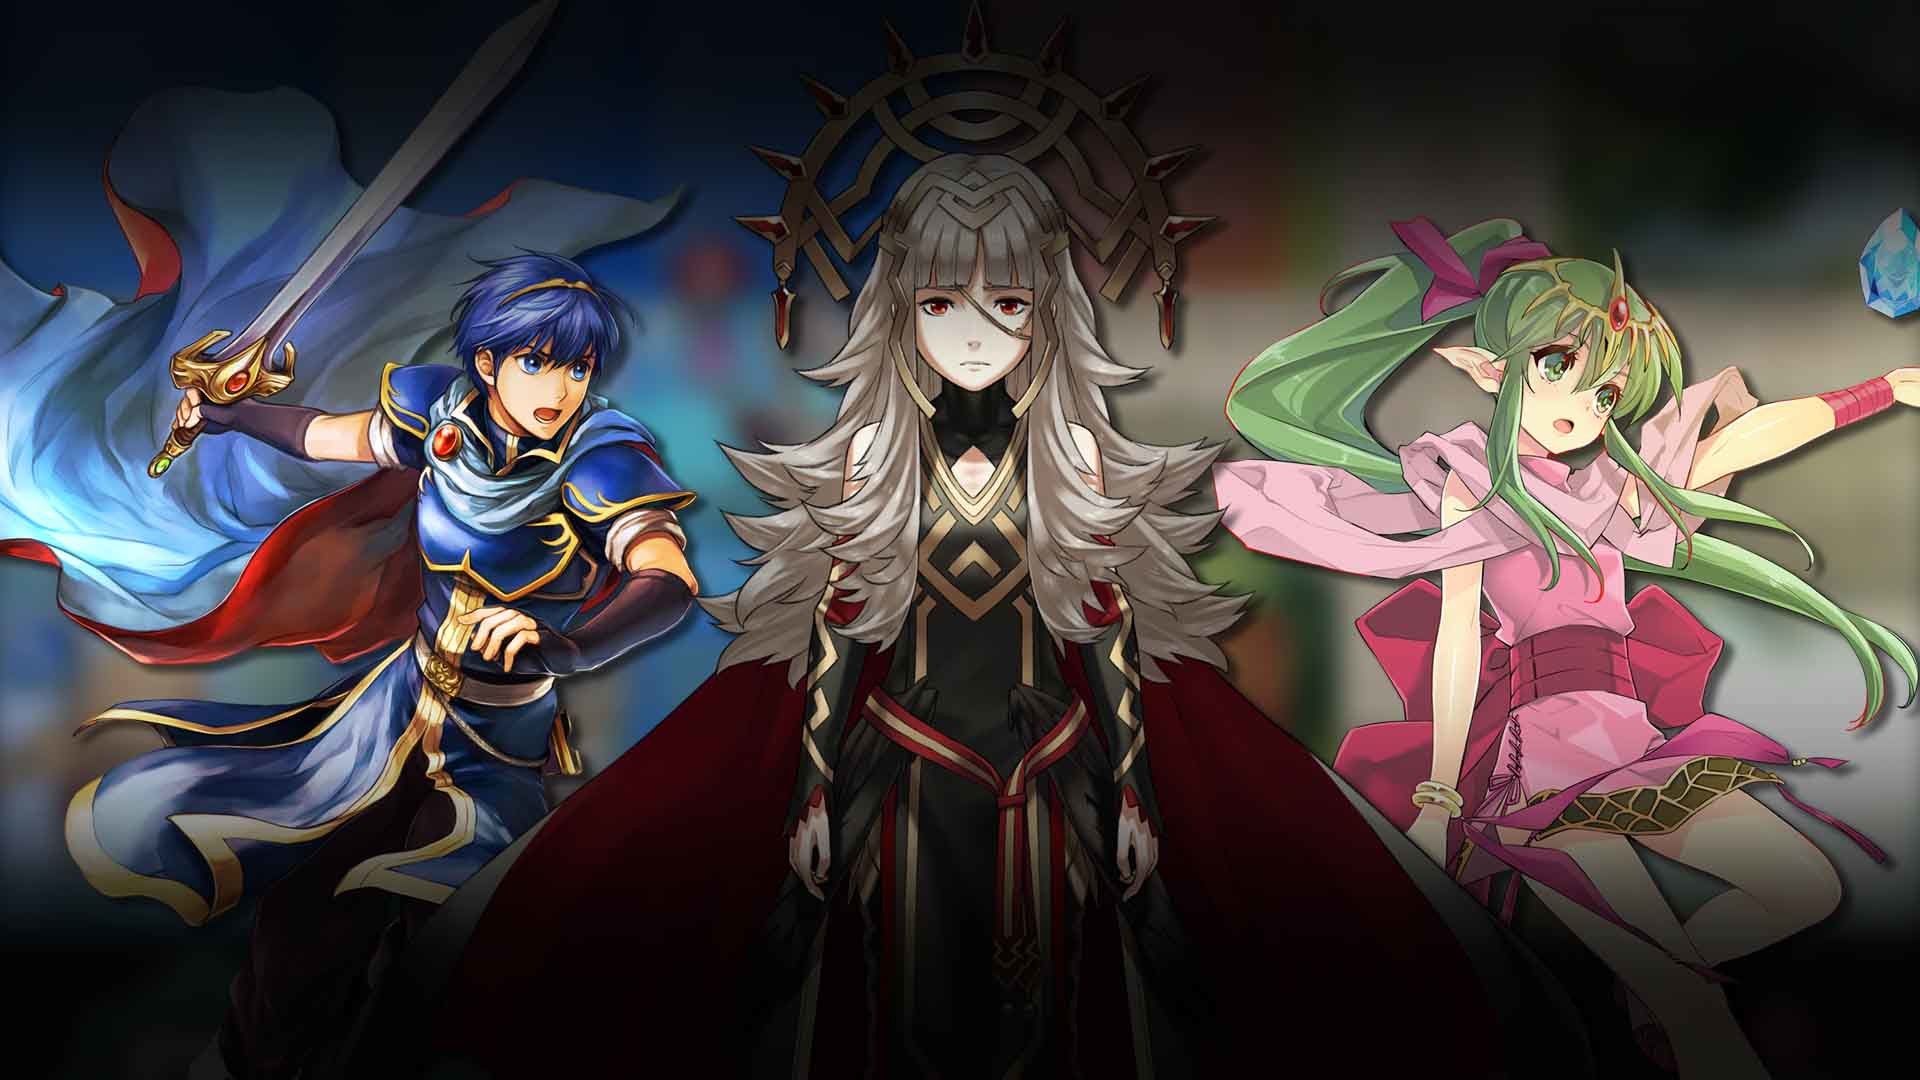 1920x1080 May's Fire Emblem wallpapers add Hector and Tharja to your year | Nintendo  Wire